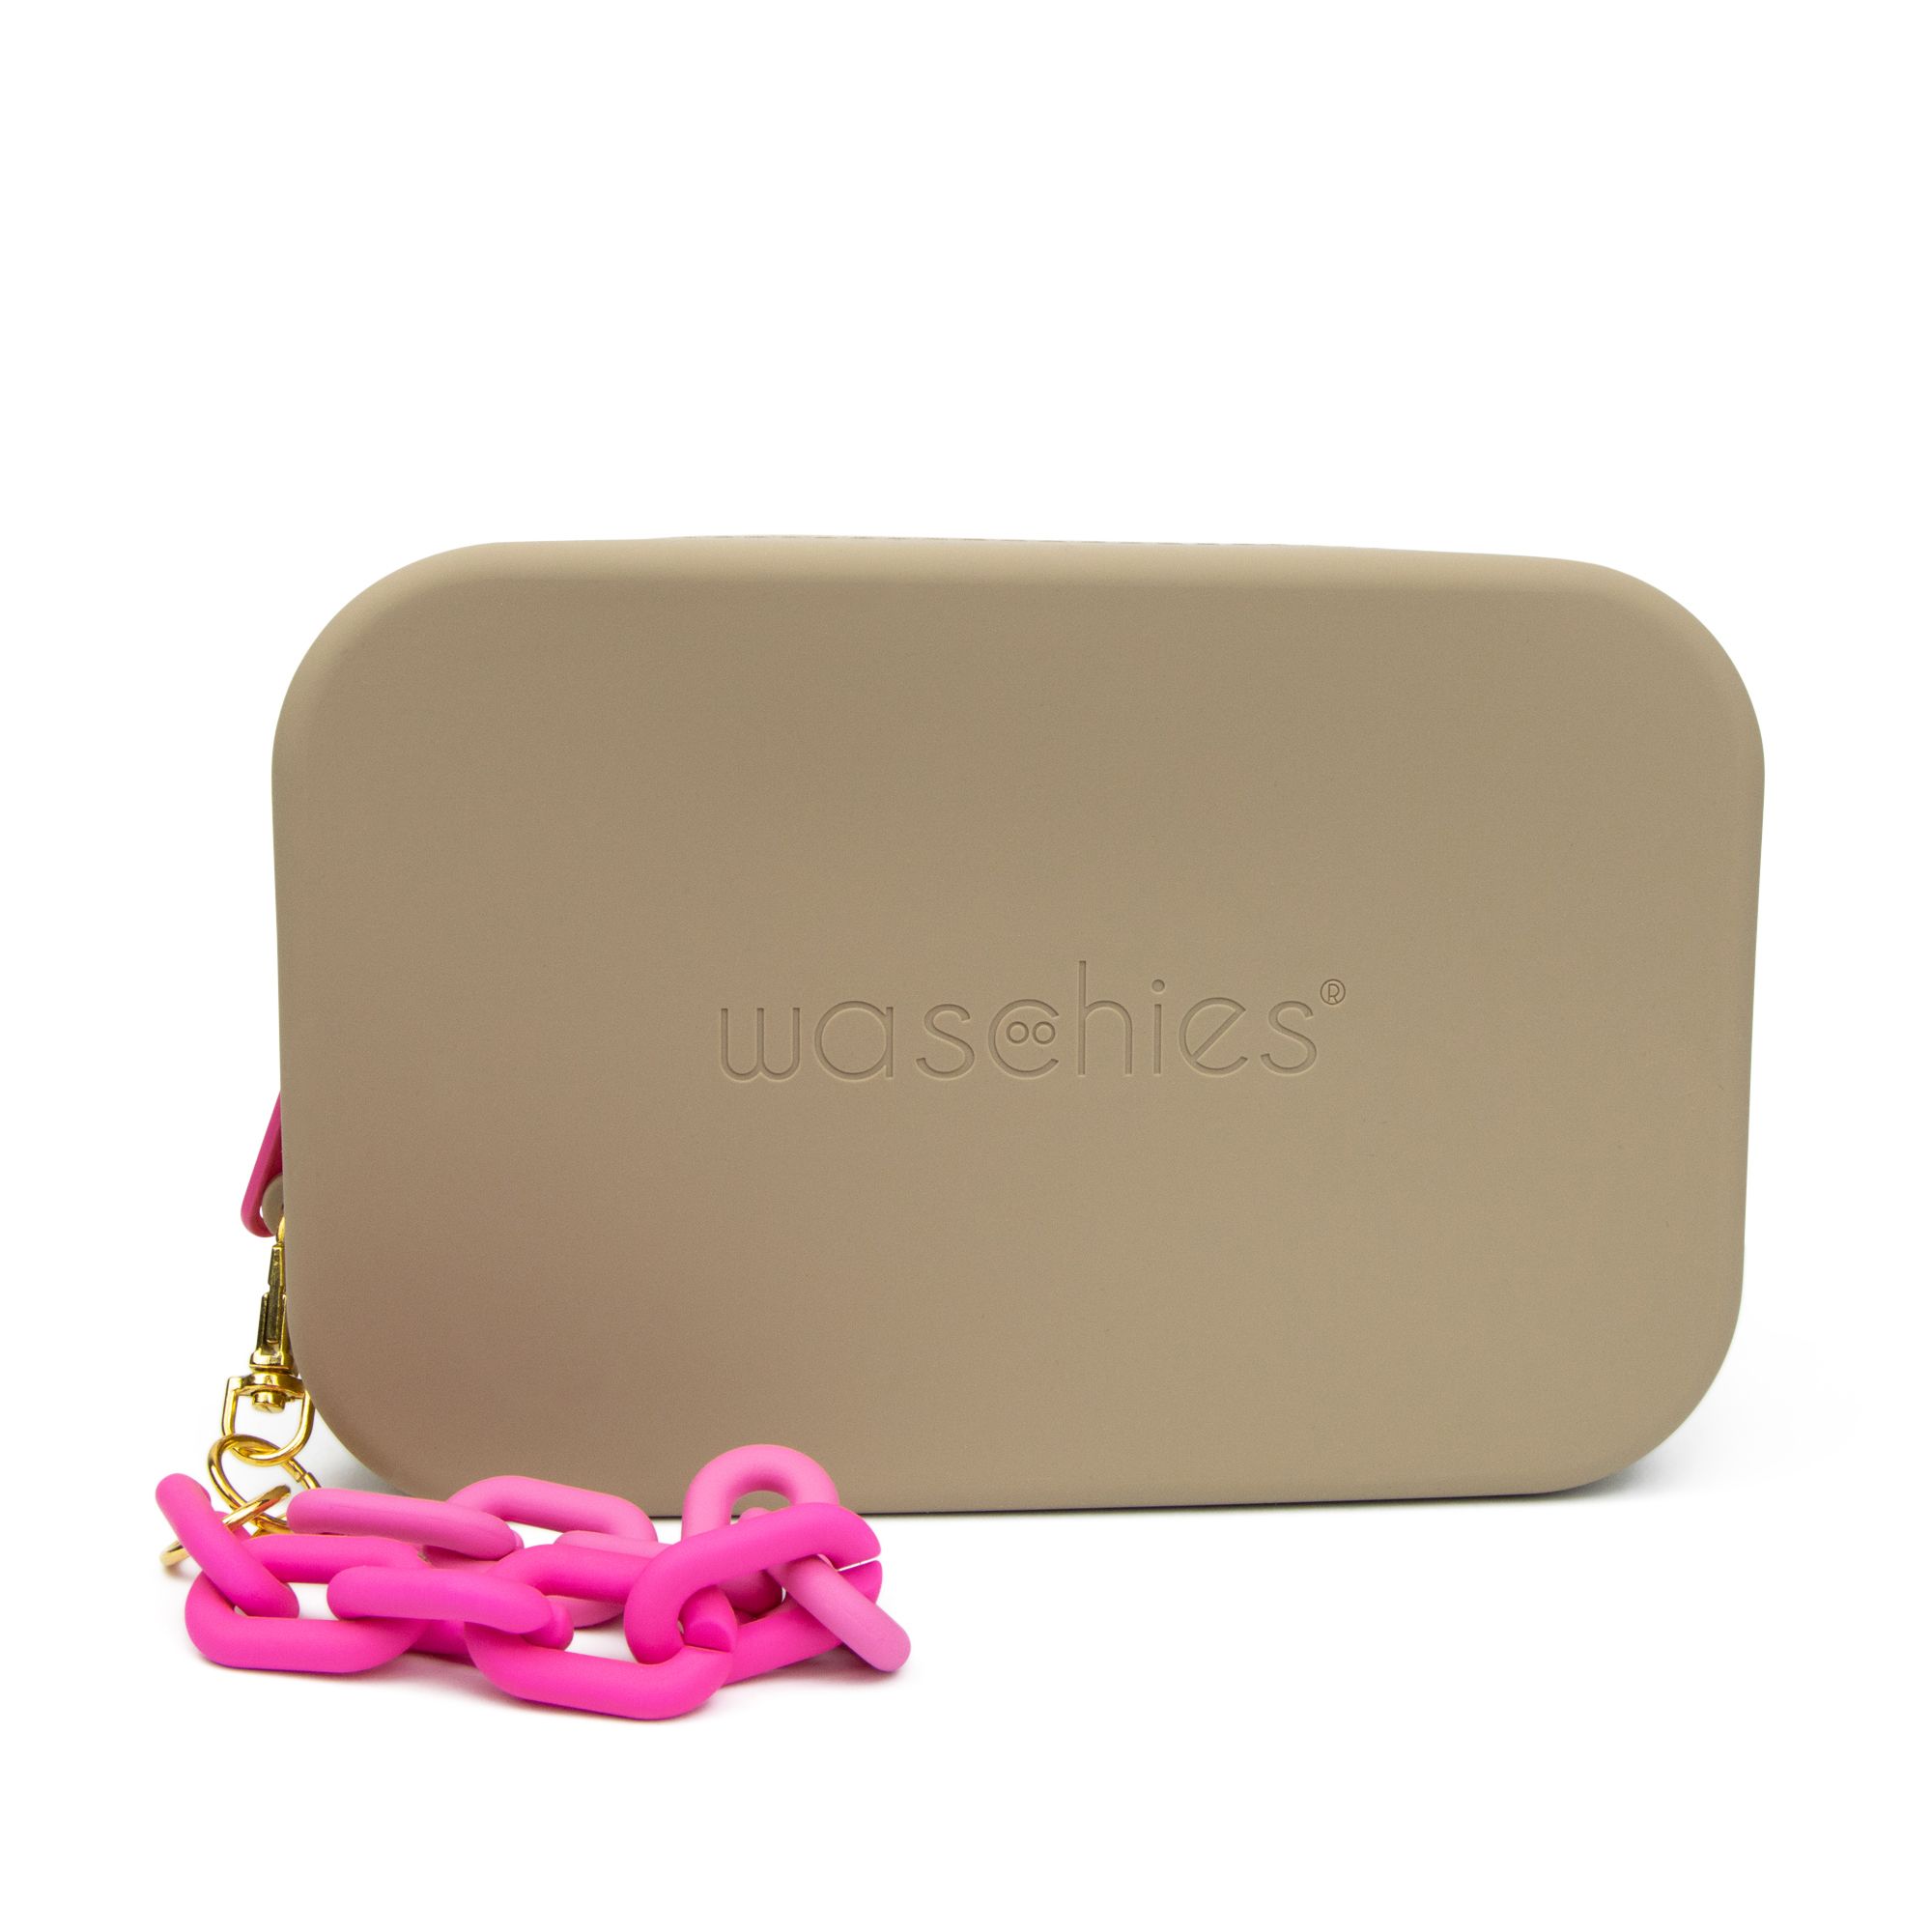 waschies Beauty Bag Brown